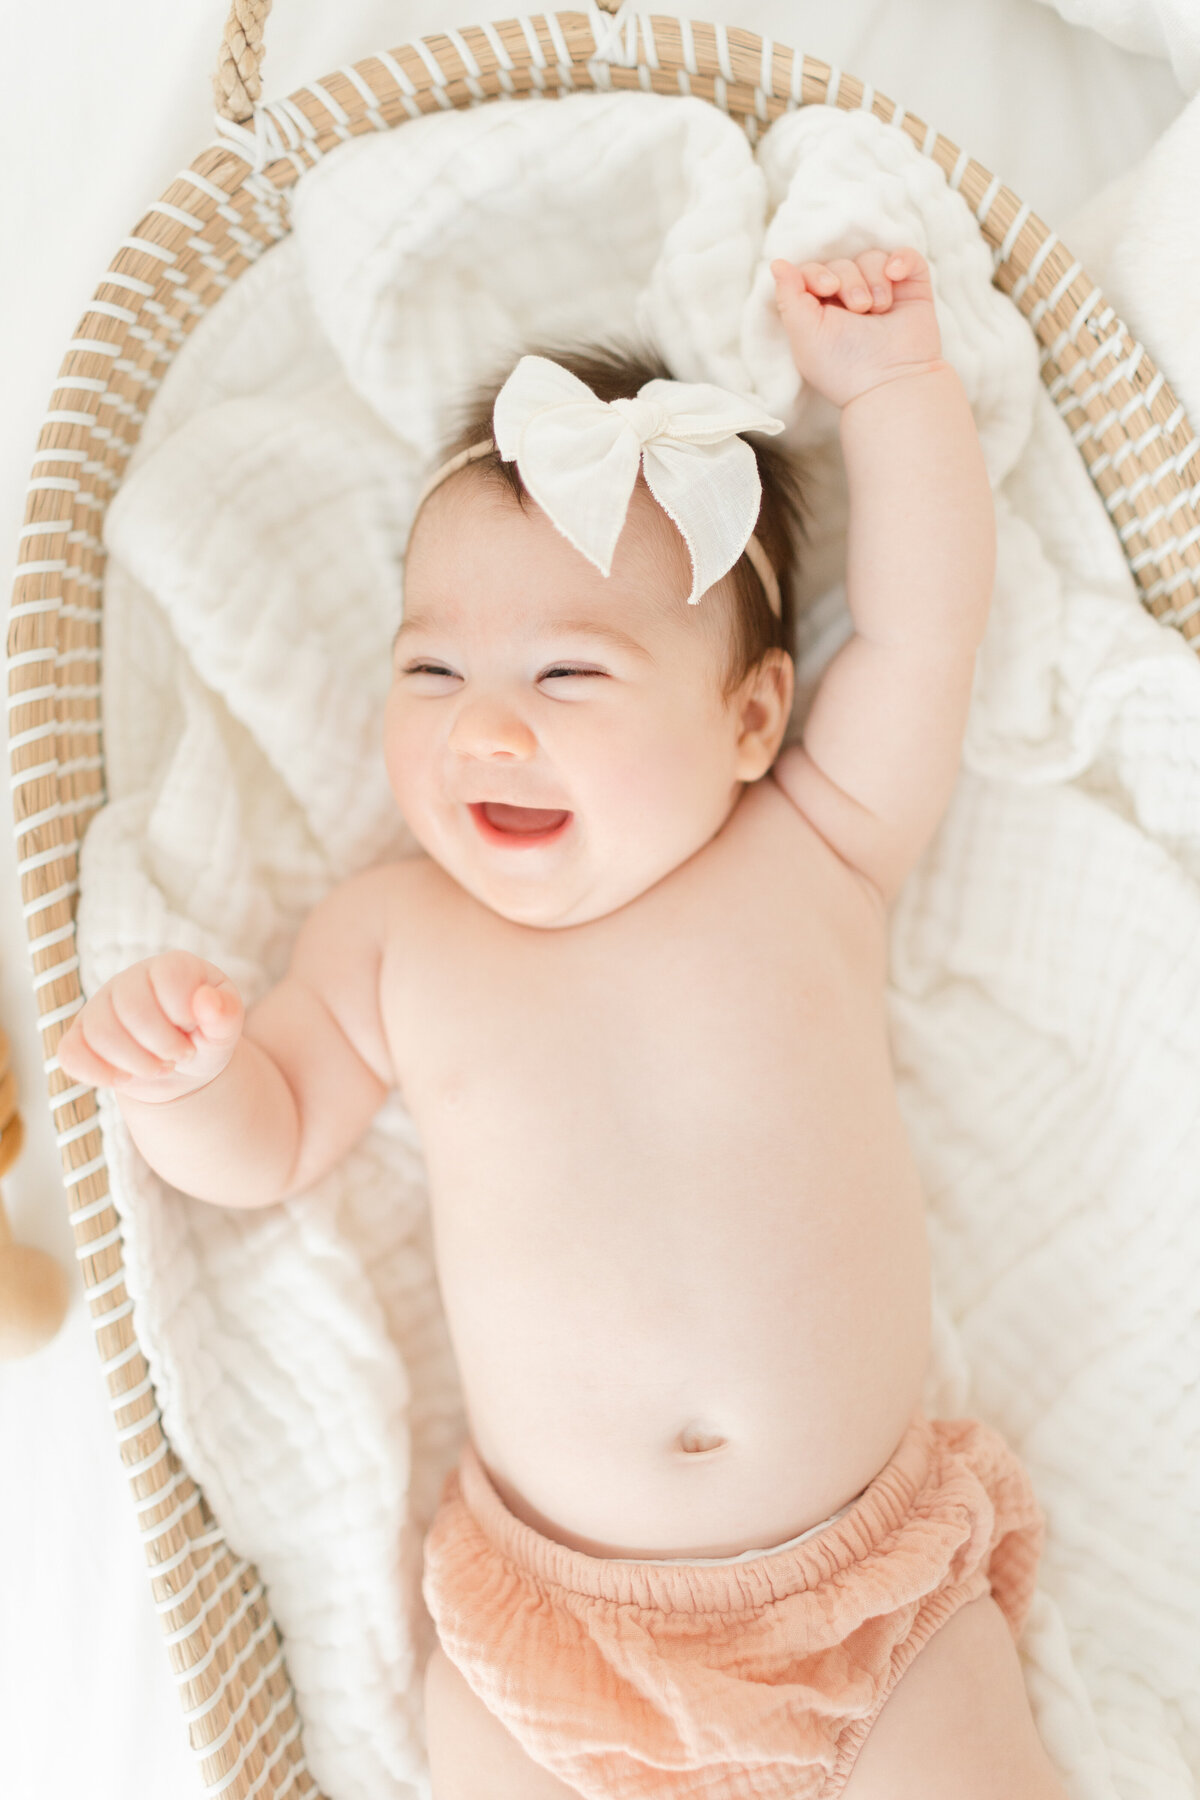 A Northern Virginia Newborn Photography photo of a baby girl on a white muslin blanket in a moses basket